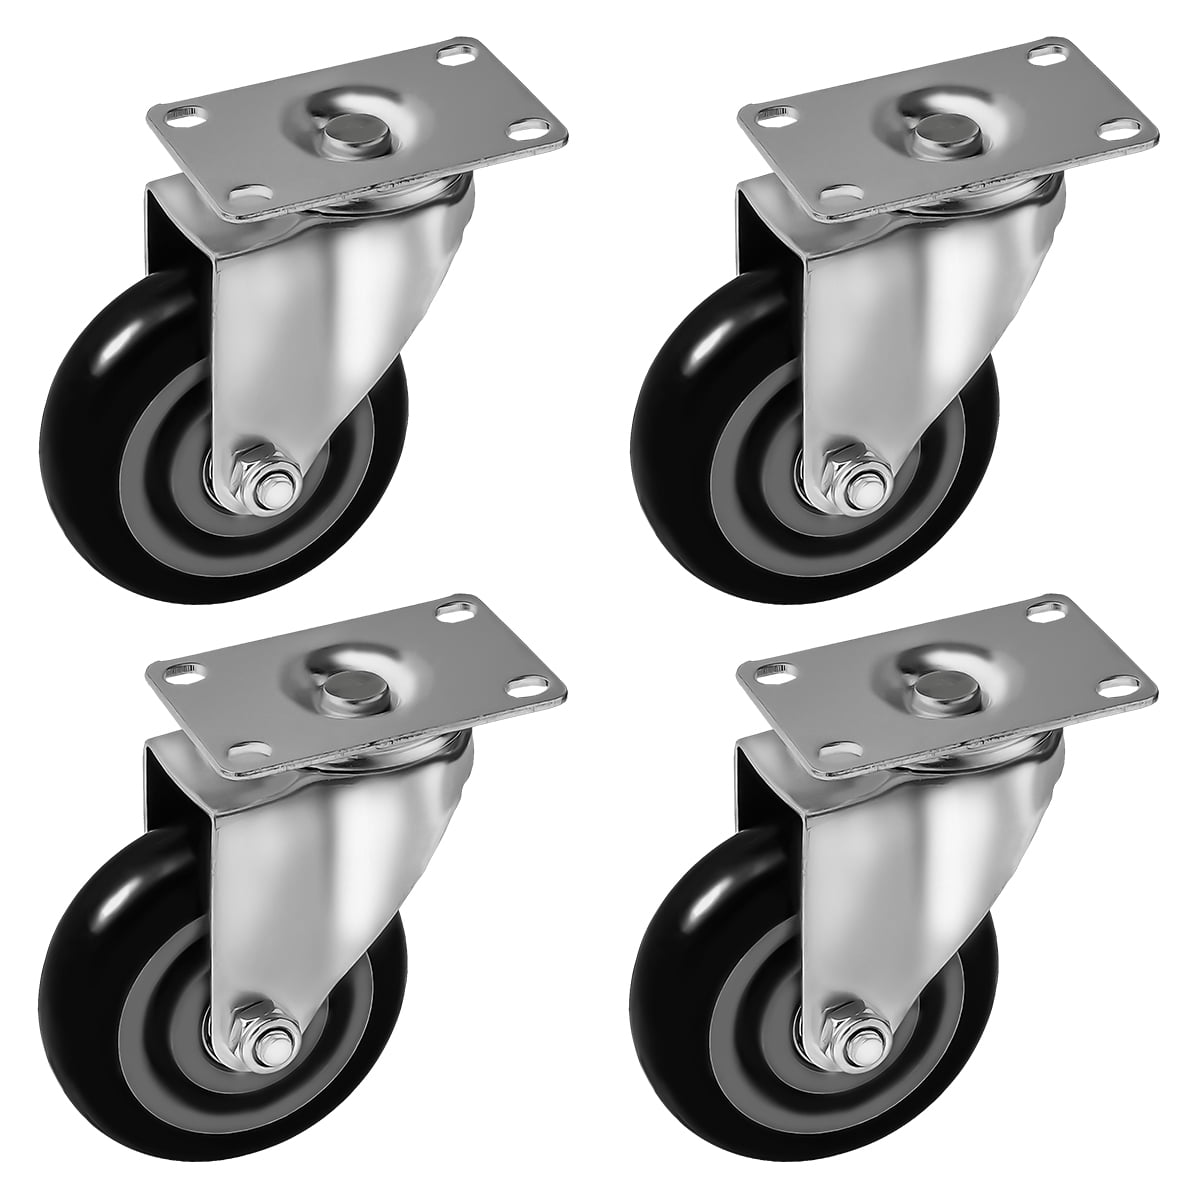 Details about   4 Pack 2.5" Swivel Caster Wheels Rubber Base With Top Plate & Bearing Heavy Duty 